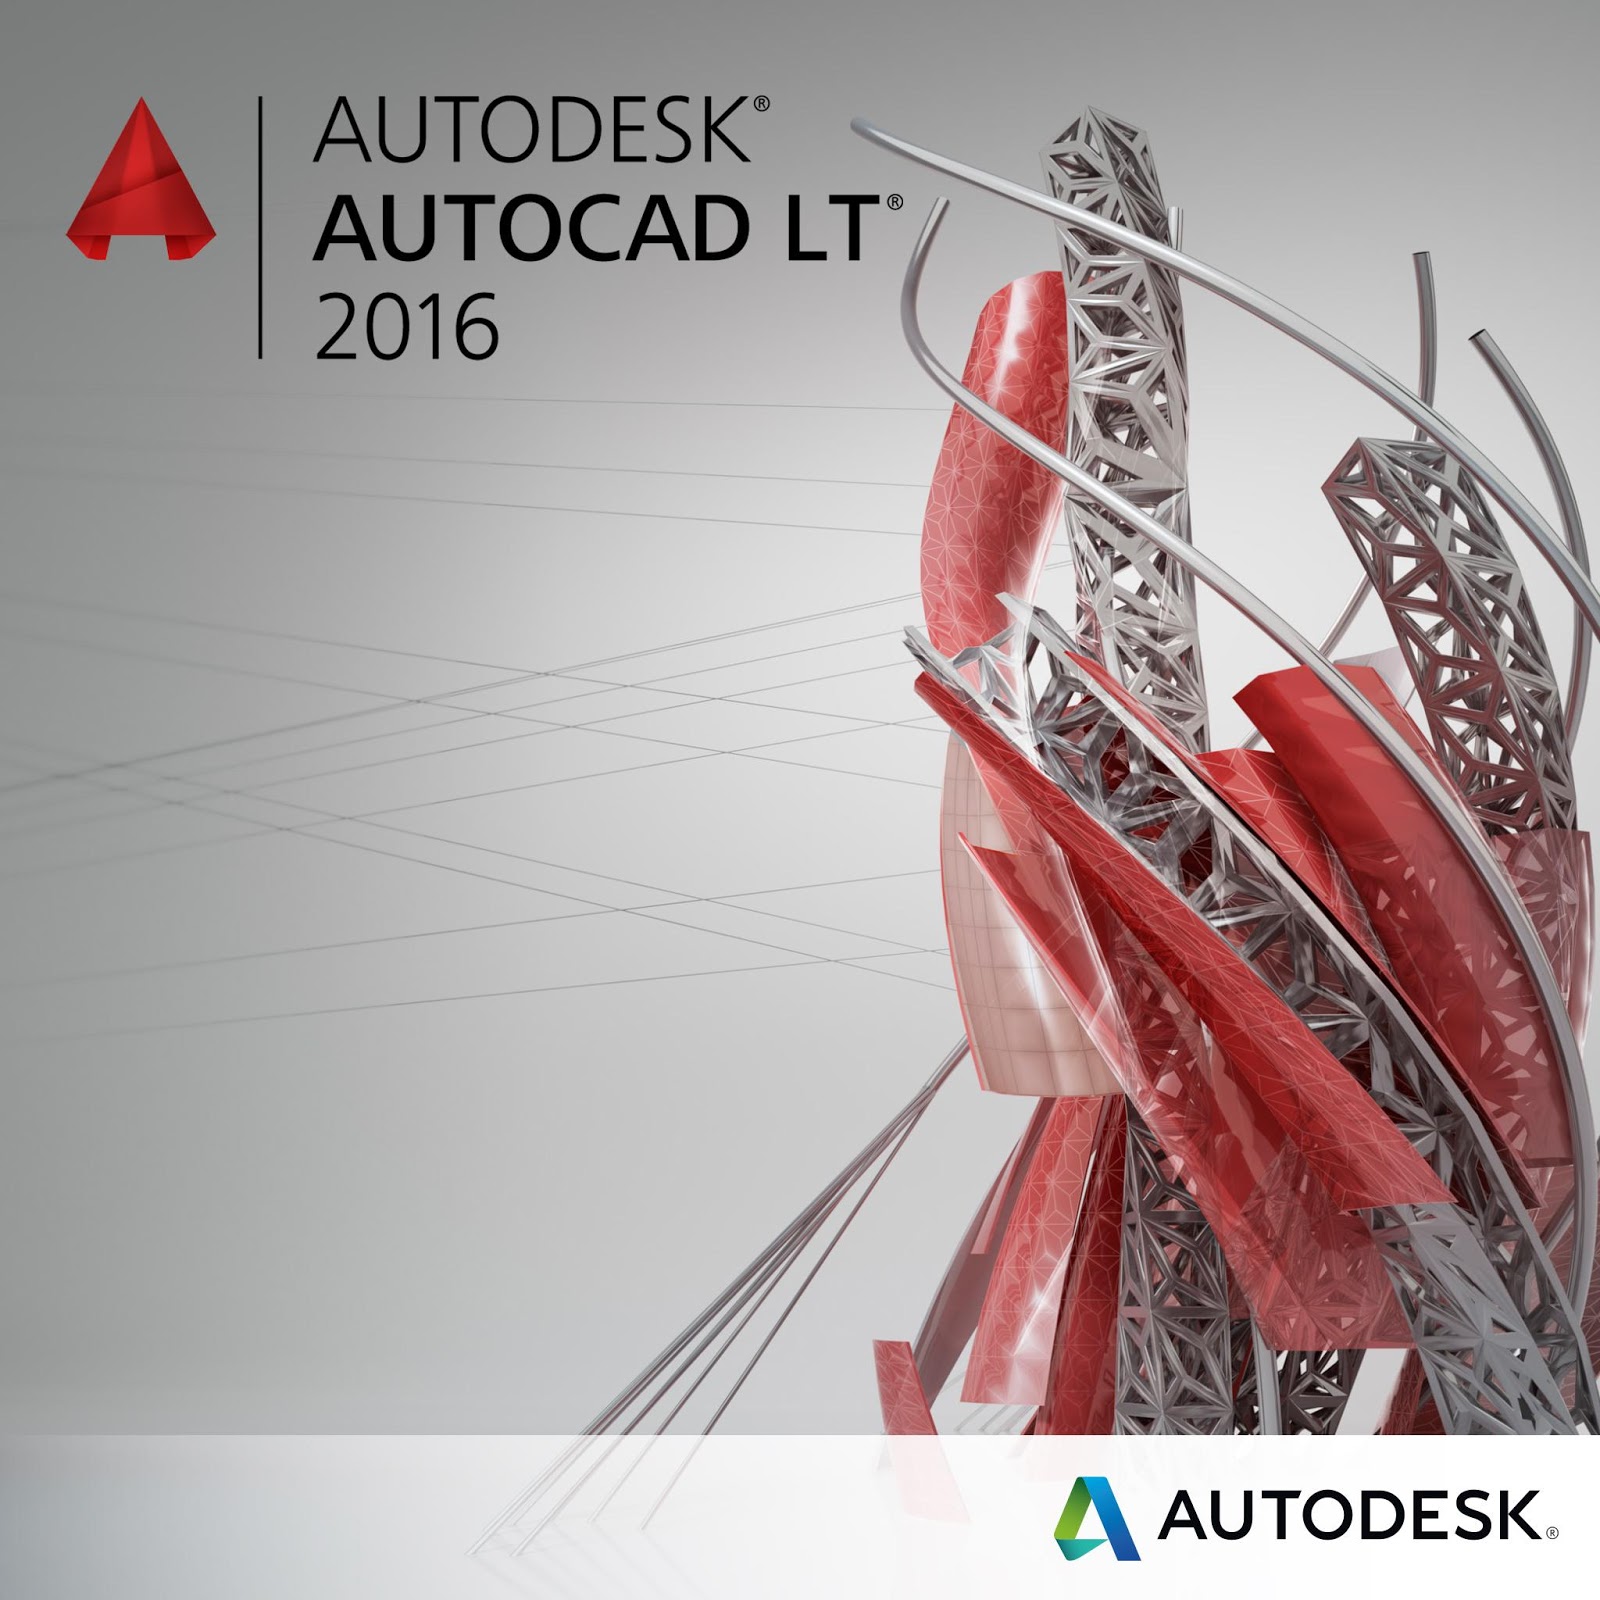 autocad 2016 free download full version with crack mac